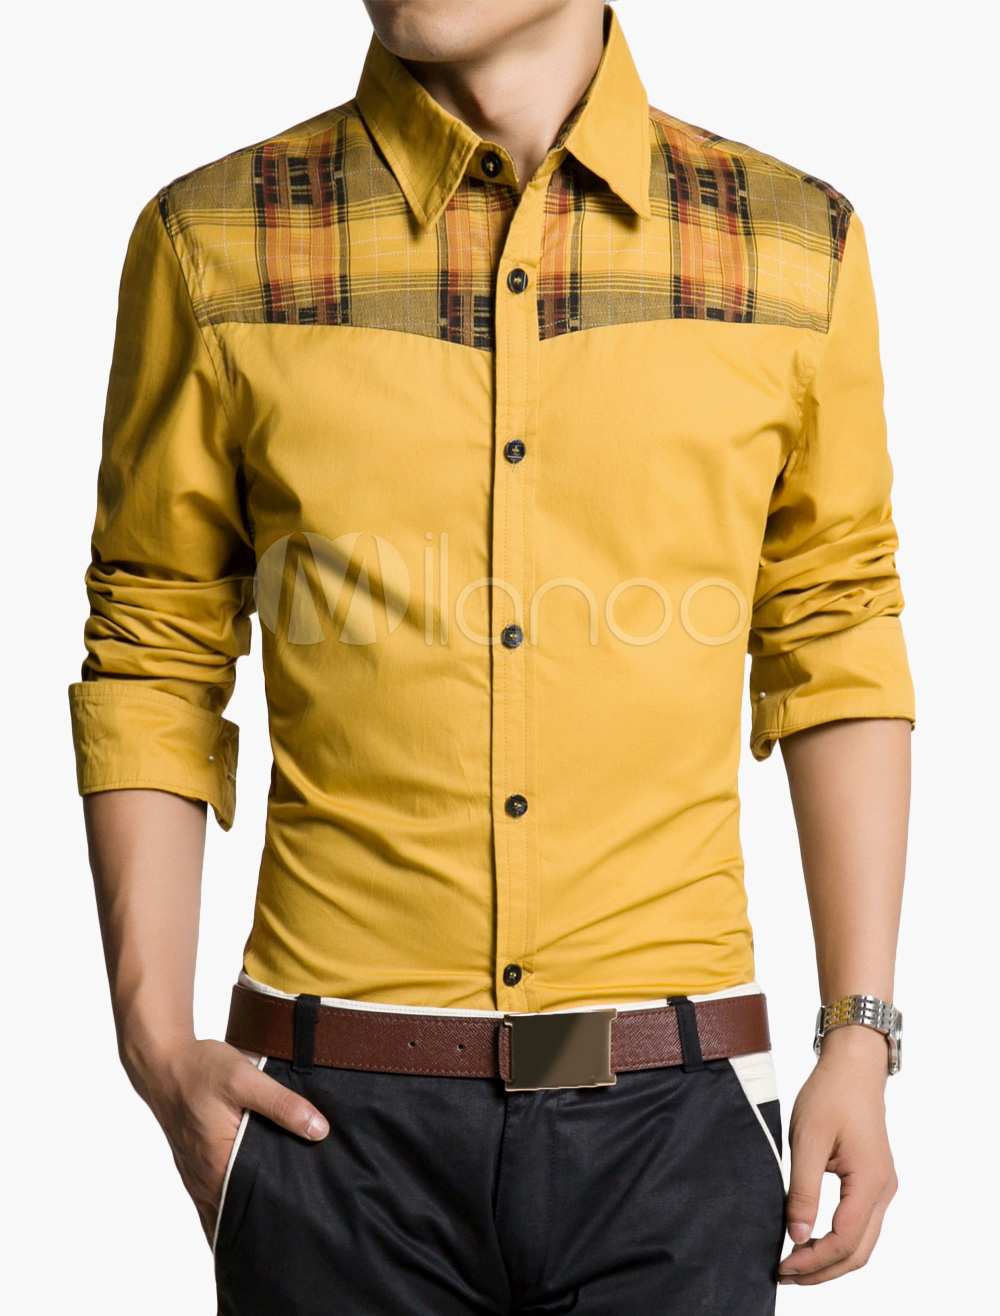 Plaid Panel Shirt with Long Sleeves in Slim Fit - Milanoo.com